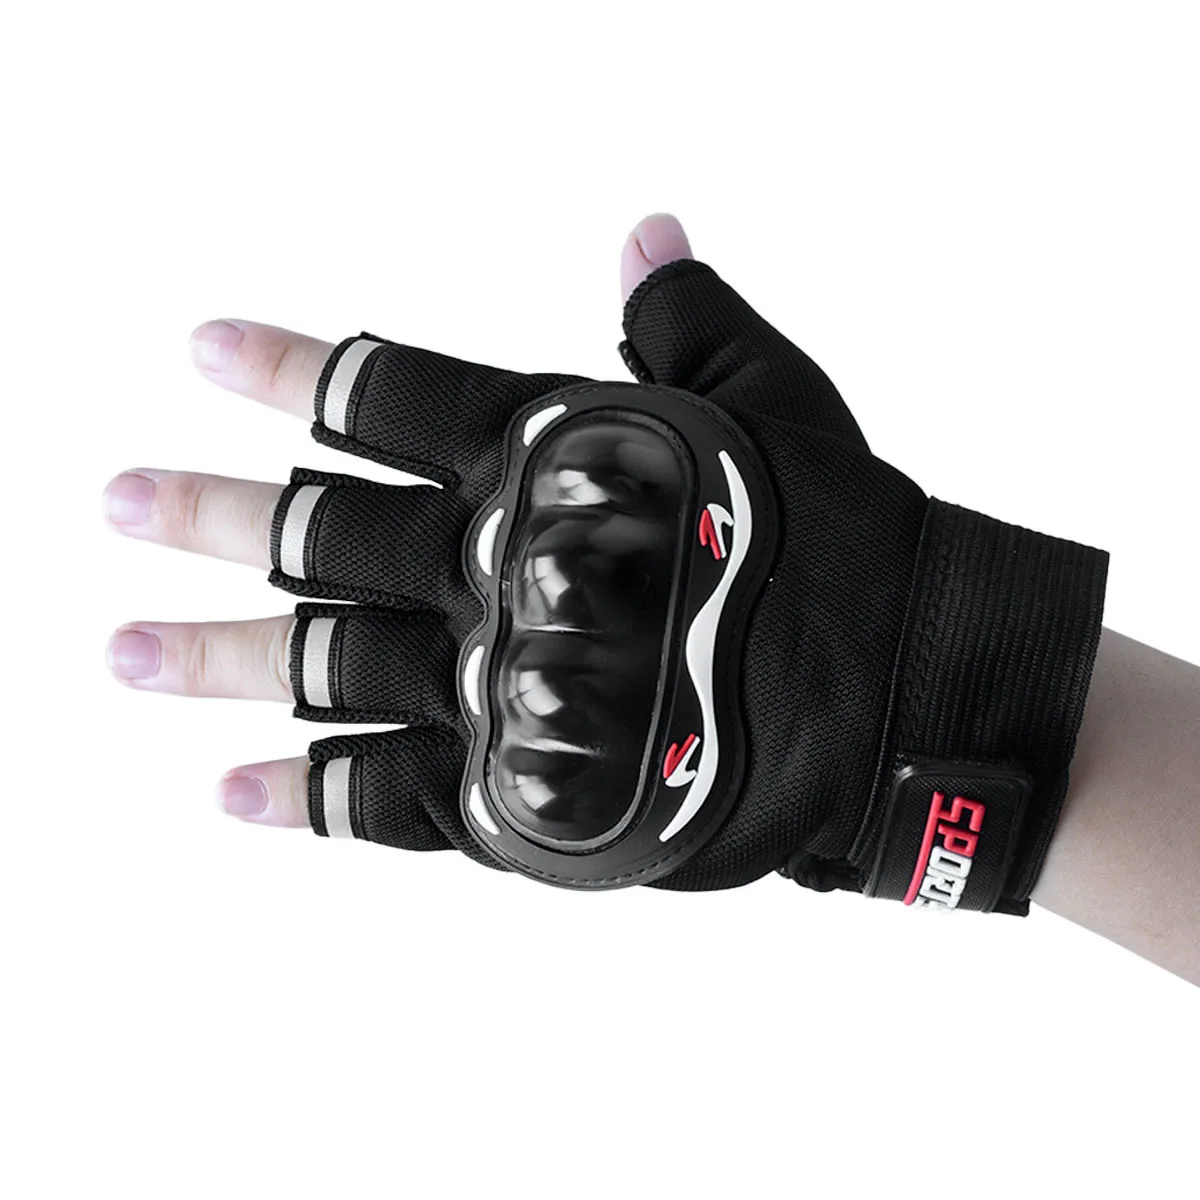 Black touchscreen half-finger gloves for outdoor activities, cycling, and - £10.09 GBP